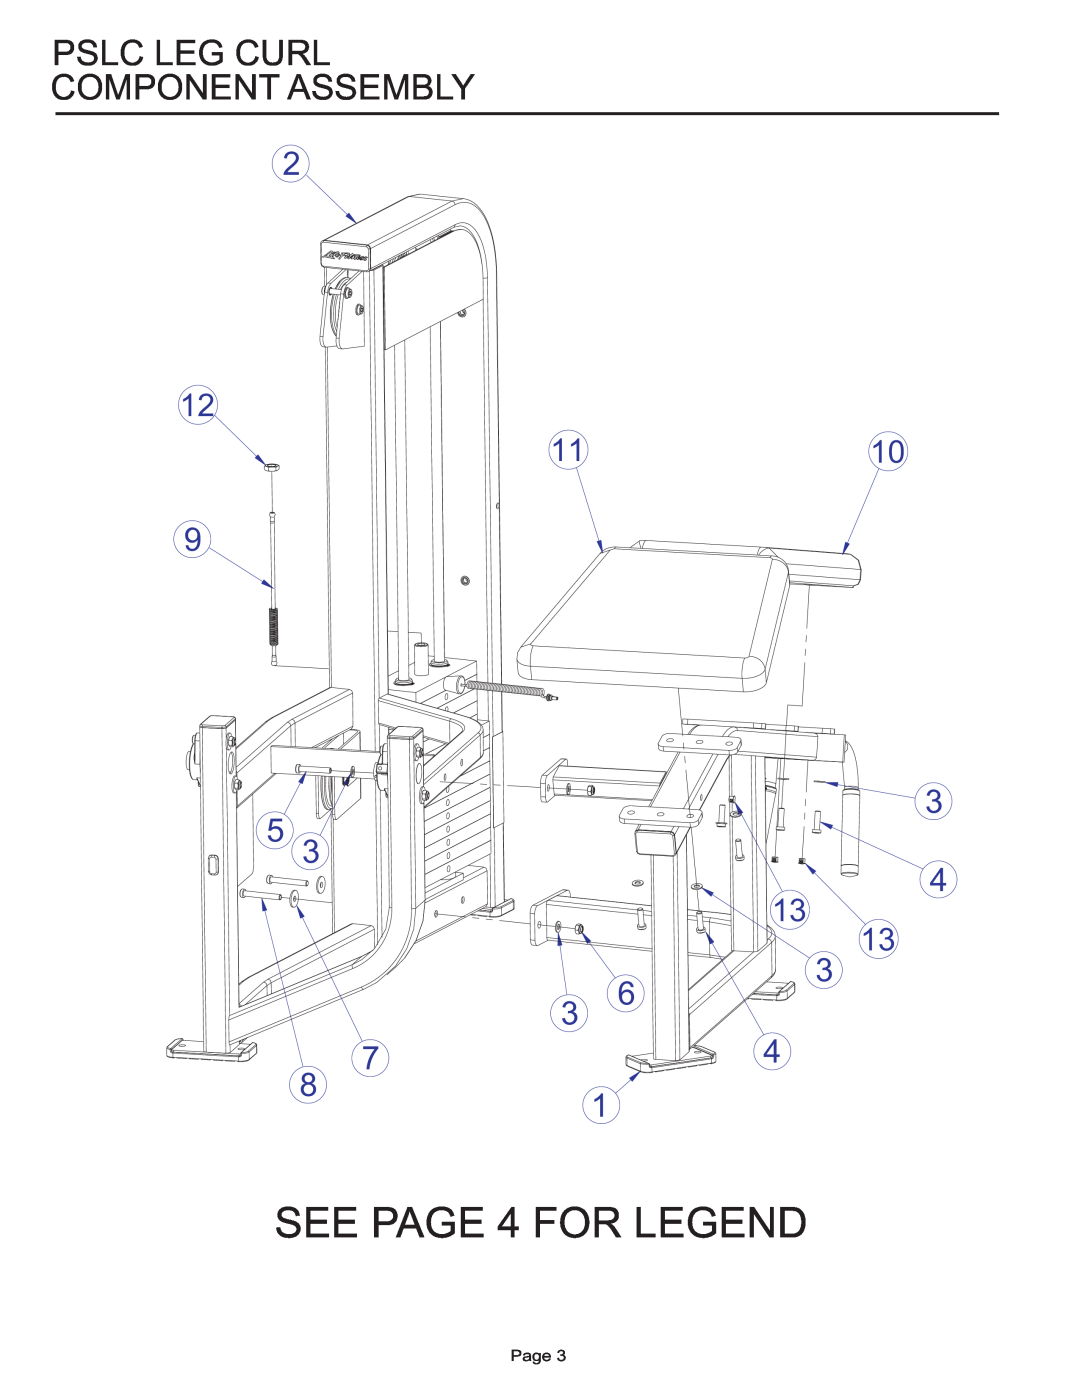 Life Fitness PSLC manual SEE PAGE 4 FOR LEGEND, Pslc Leg Curl Component Assembly, 1110, Page 